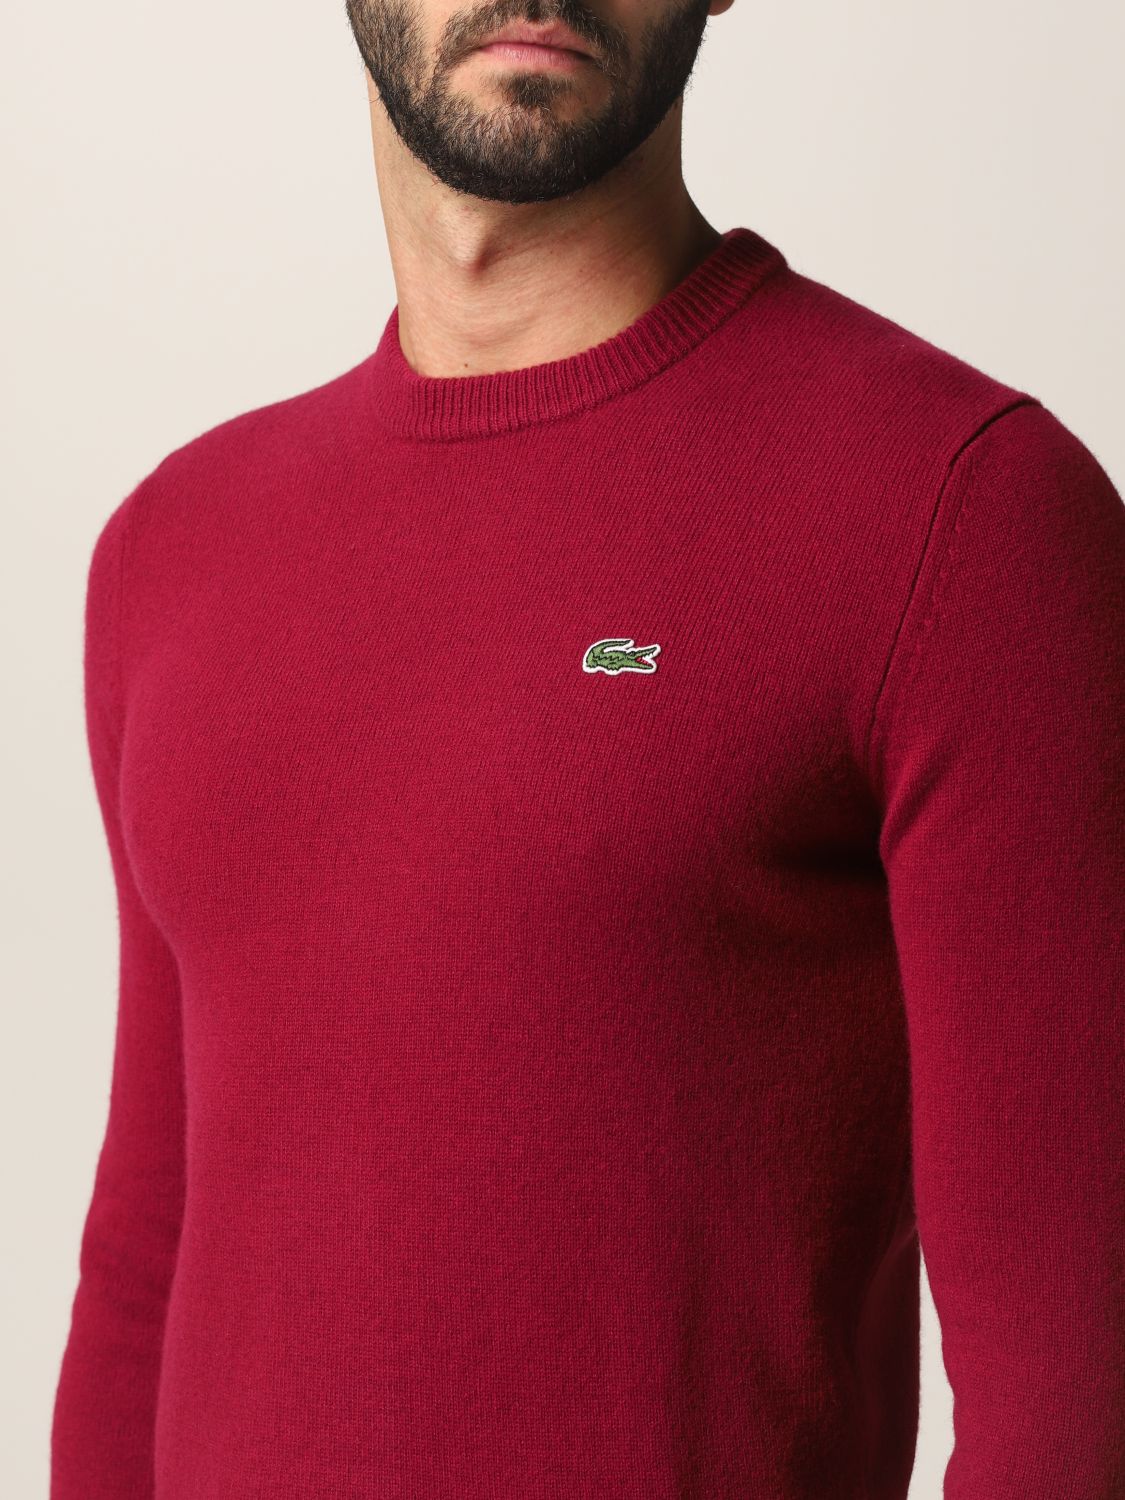 sweater for man - Red | sweater AH1988 online on GIGLIO.COM